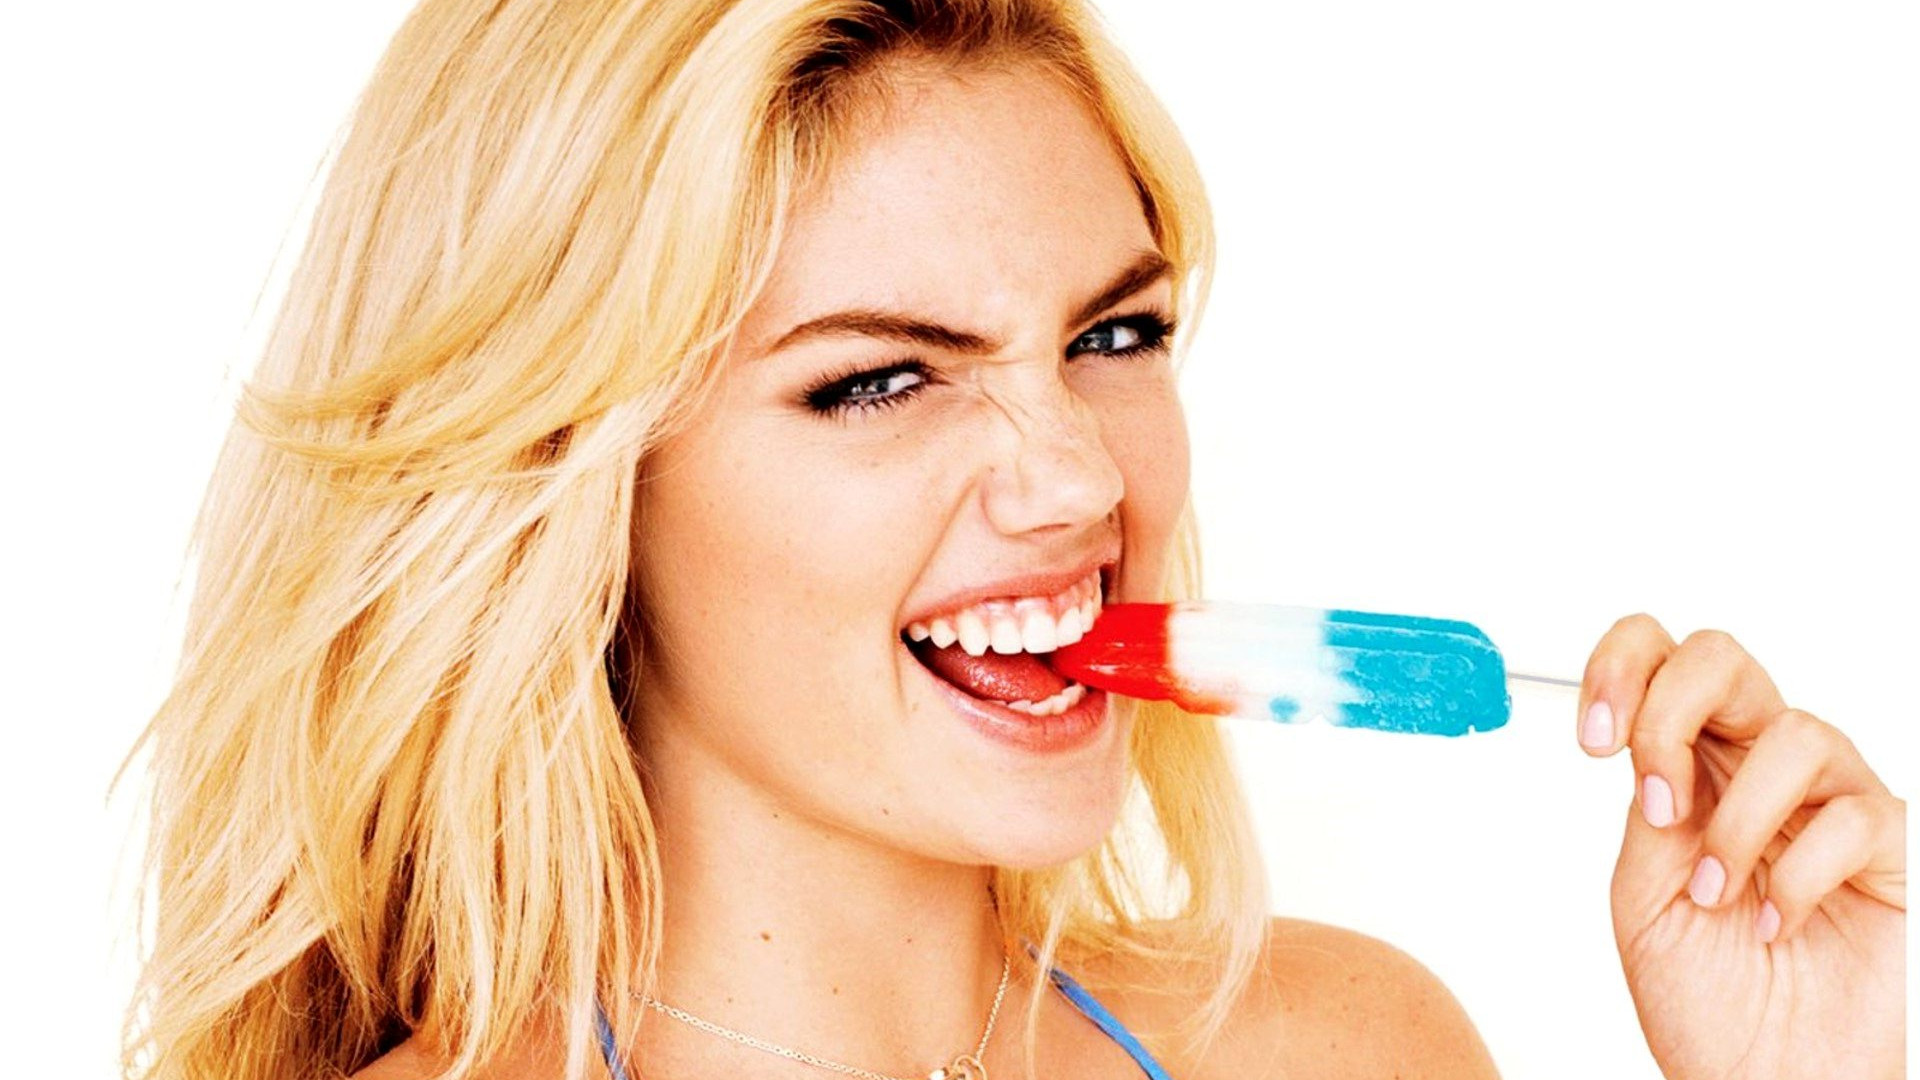 People 1920x1080 Kate Upton model celebrity blonde biting smiling face women cropped simple background closeup